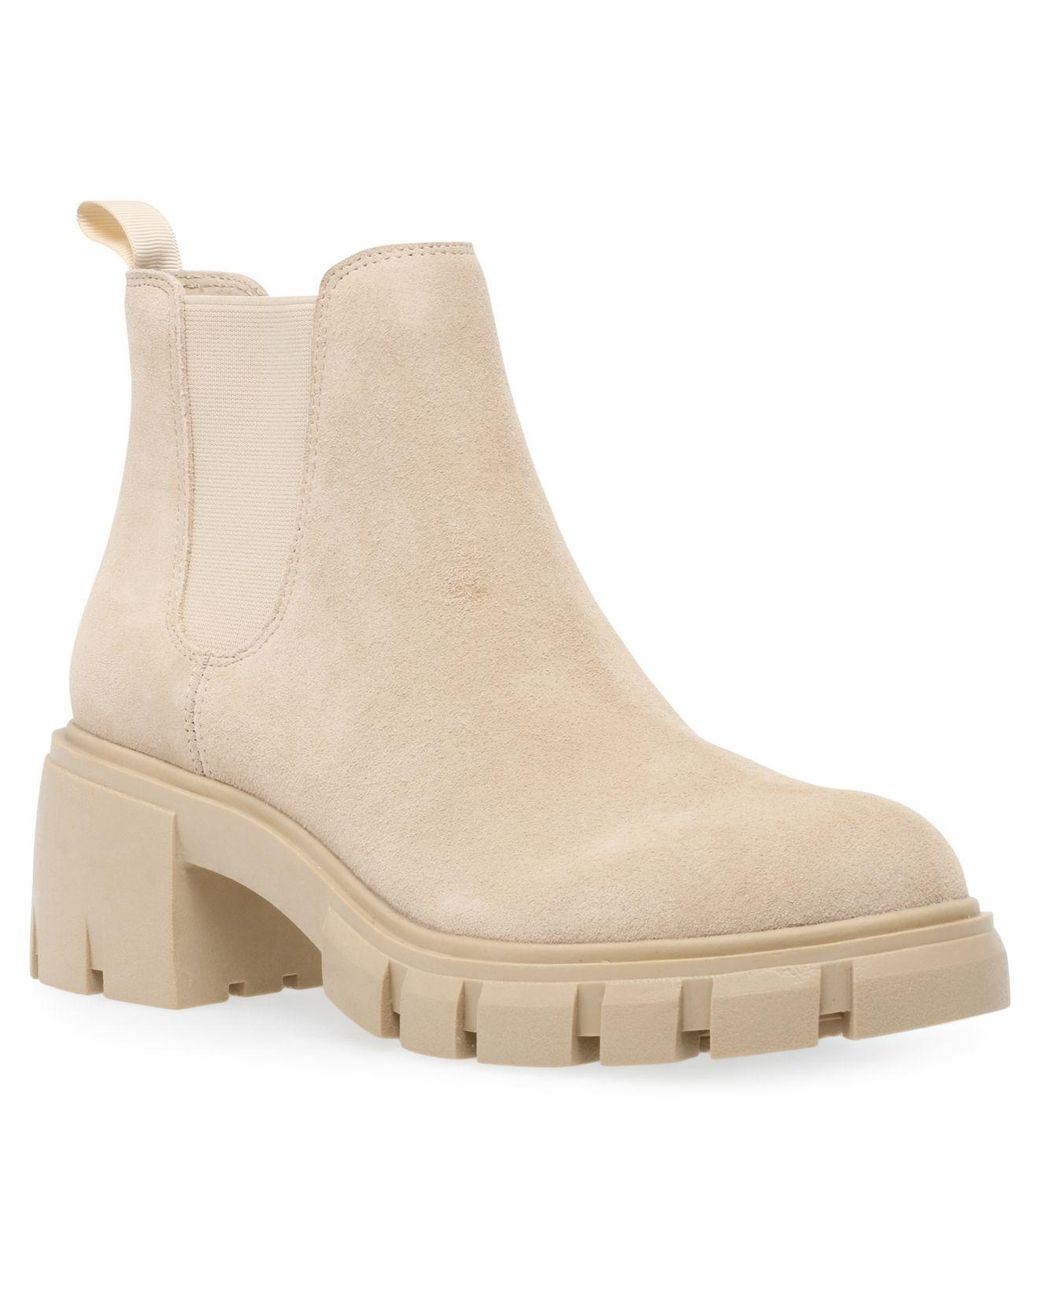 Steve Madden Howler Lug Sole Chelsea Booties in Natural | Lyst